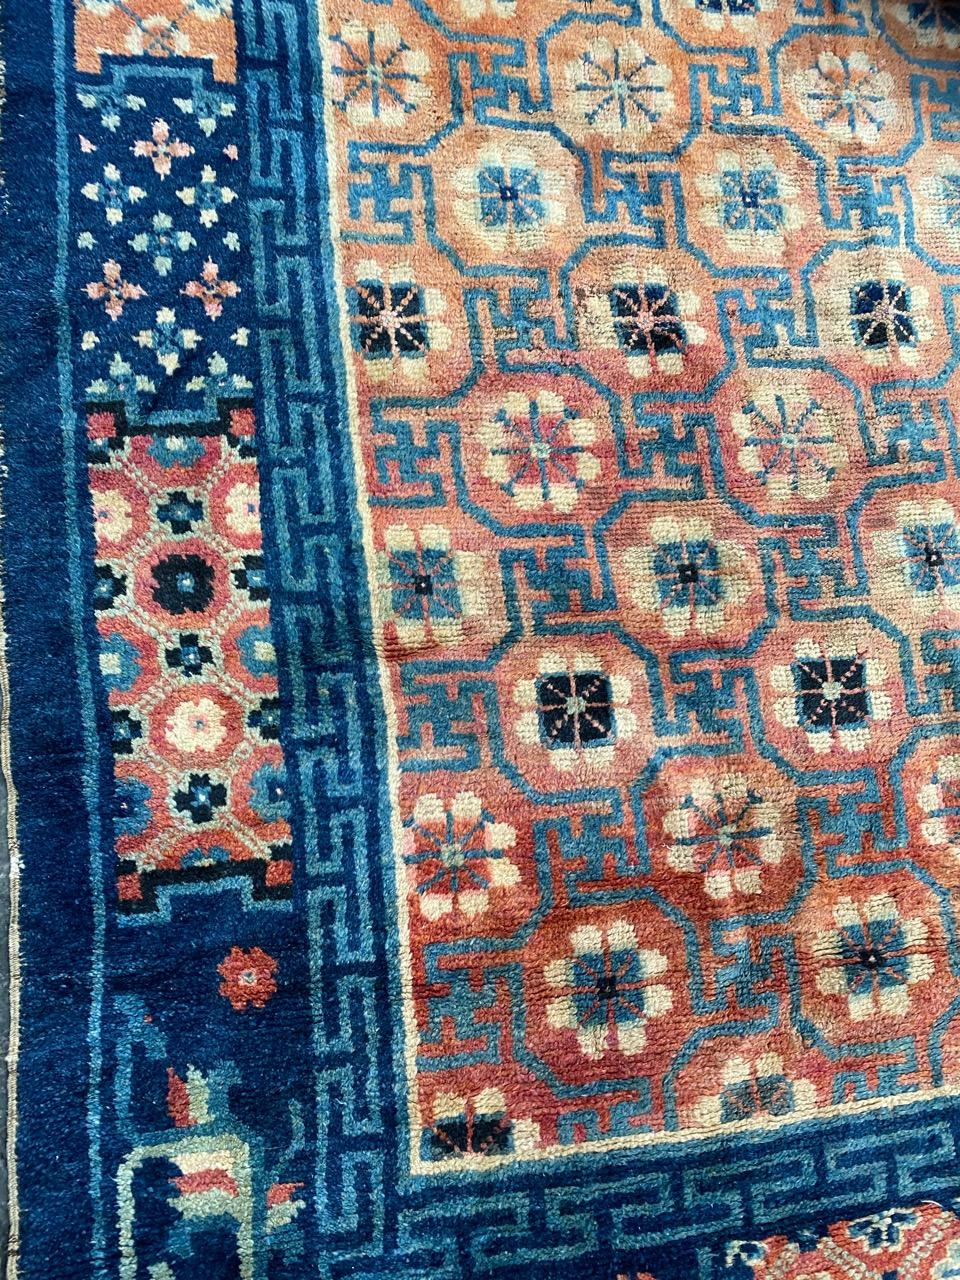 Nice late 19th century Chinese rug with a Chinese geometrical design and beautiful natural colors, entirely hand knotted with wool velvet on cotton foundation.

✨✨✨
